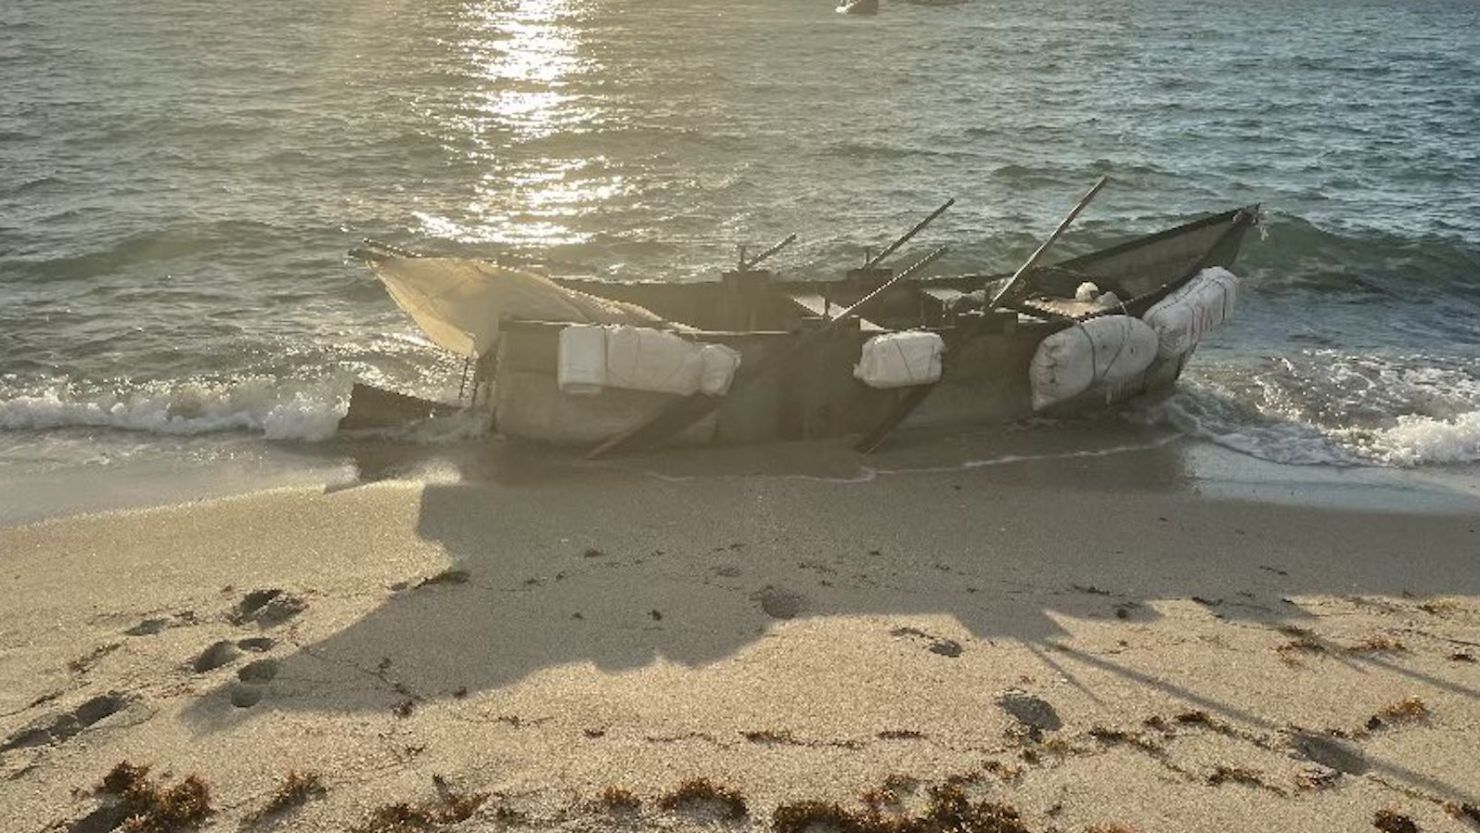 Chief Patrol Agent of the Miami Sector Walter Slosar posted this photo of a boat carrying 15 Cuban migrants on Haulover Beach, Florida, on Monday.